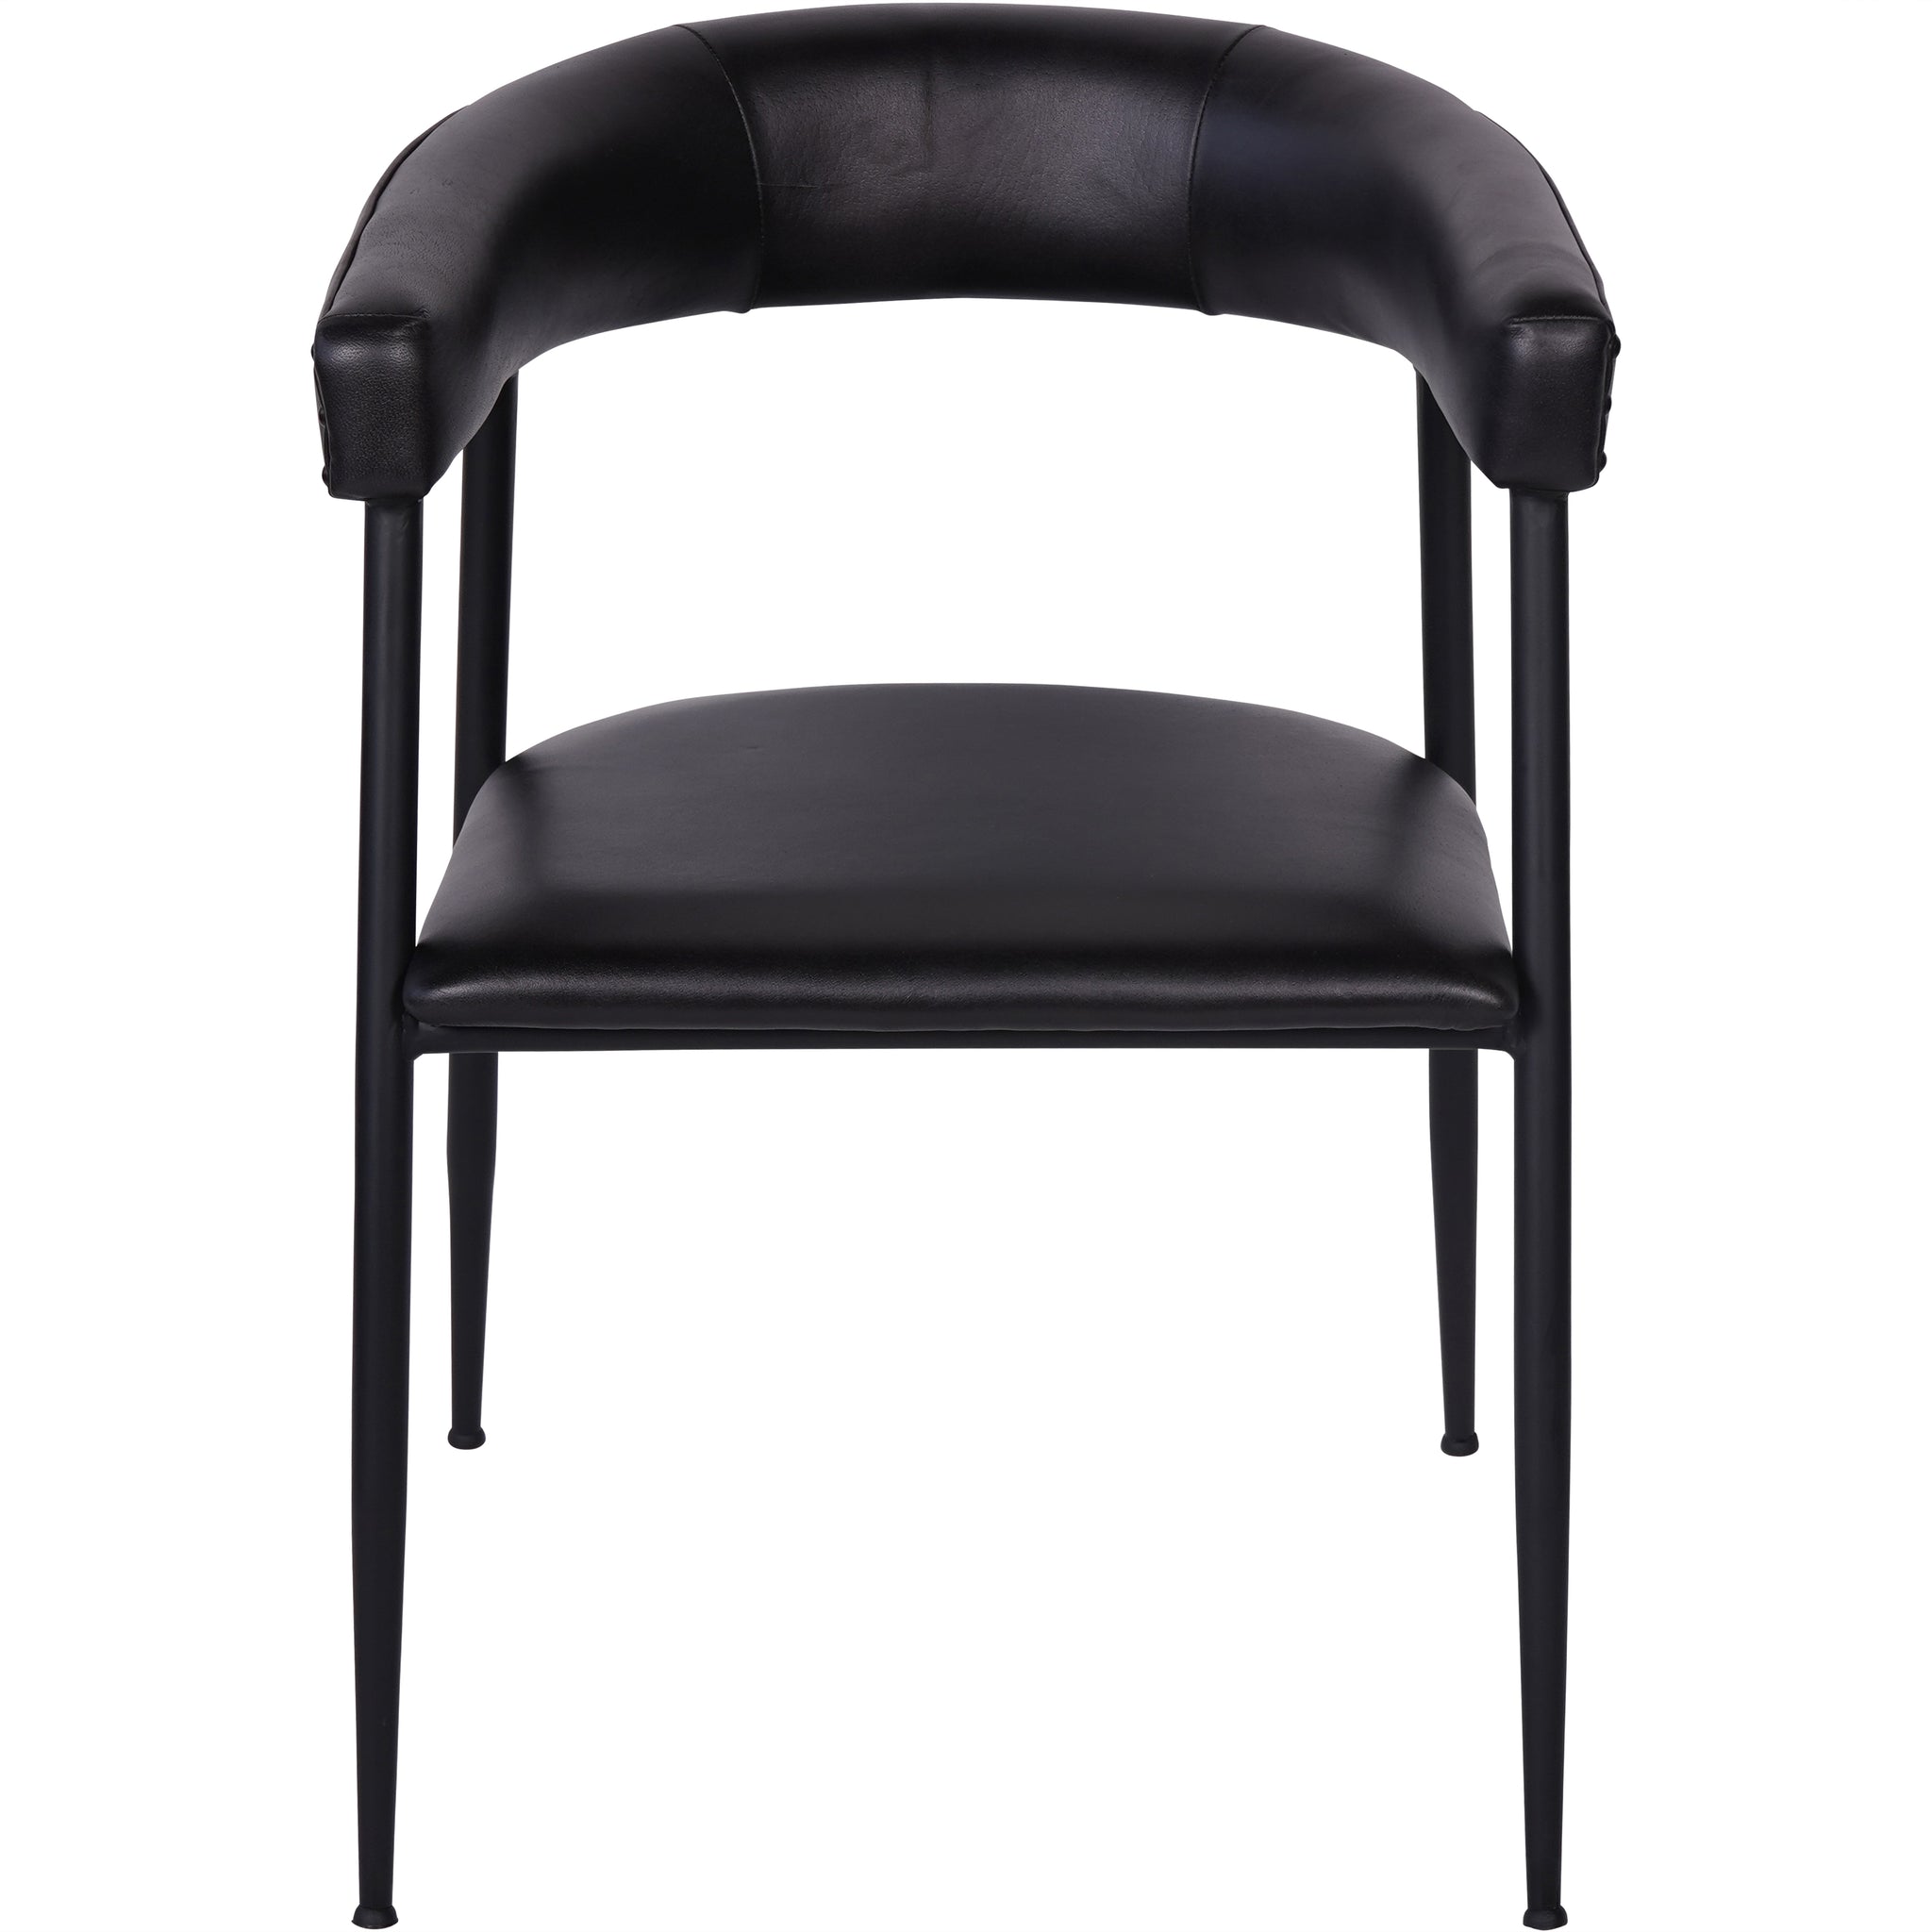 Set of 2 Cameron Leather Dining Chairs in Charcoal